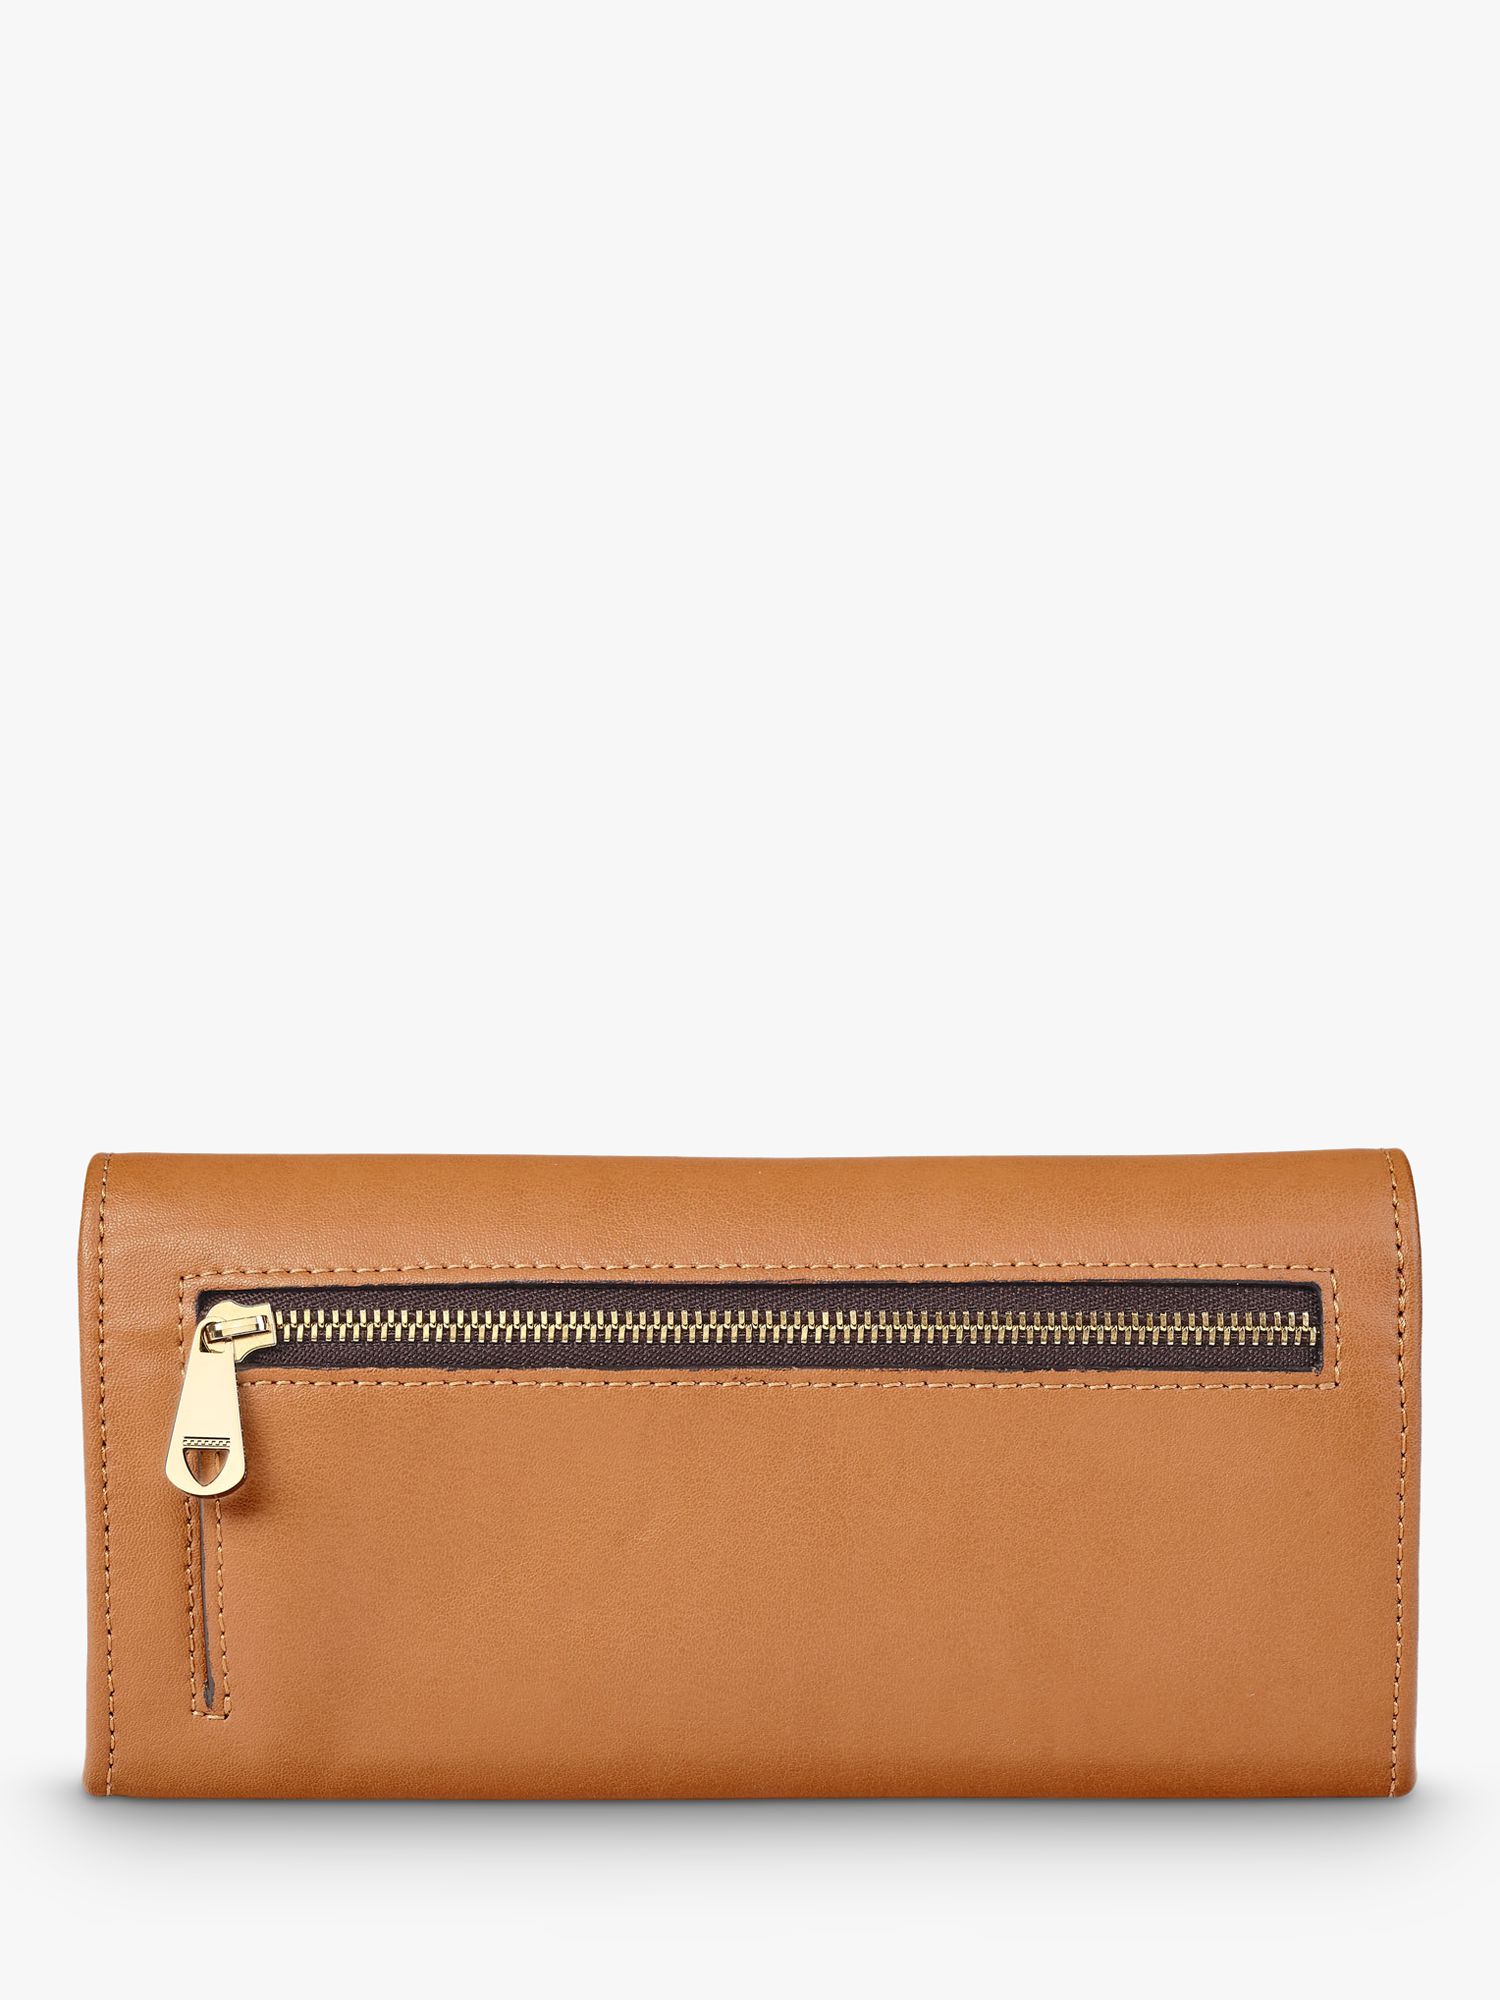 Buy Aspinal of London Lottie Smooth Leather Purse, Tan Online at johnlewis.com